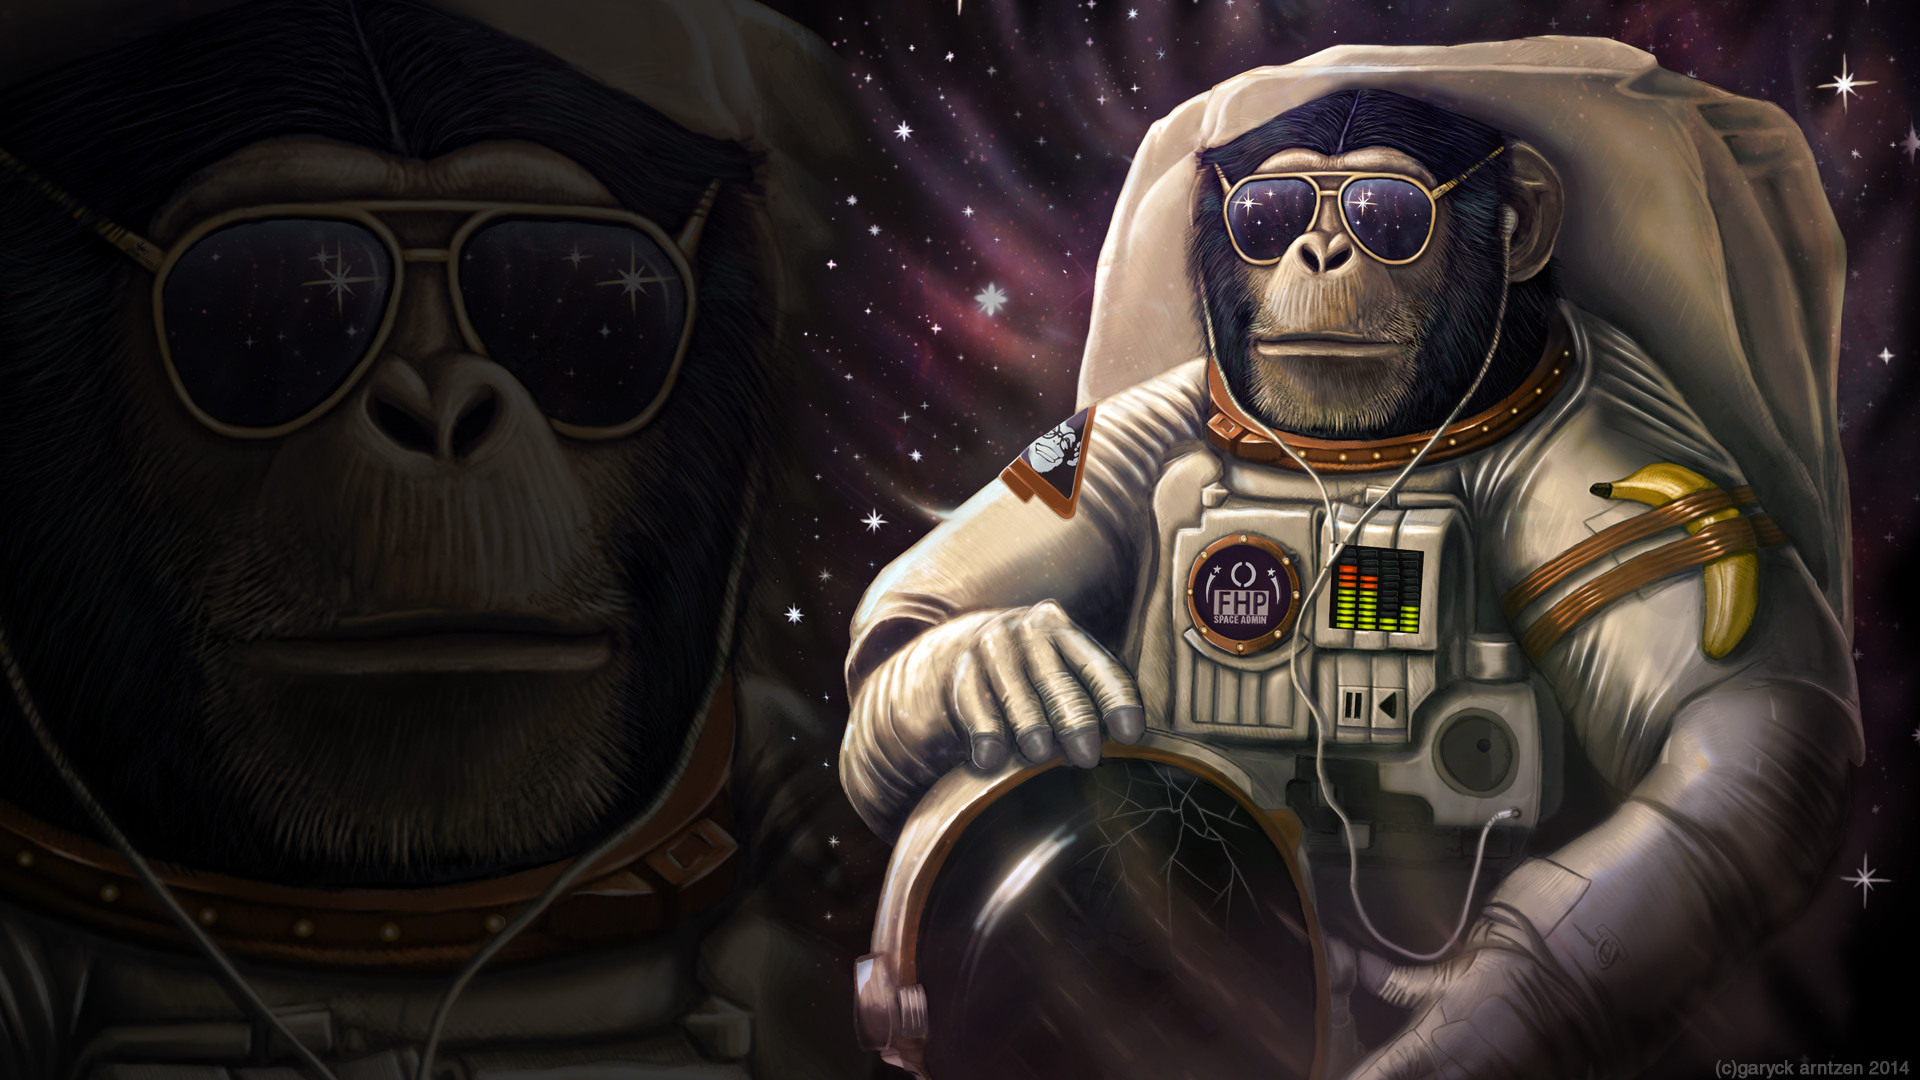 1920x1080 Amazing Astronaut Wallpaper page 2 Pics about space 